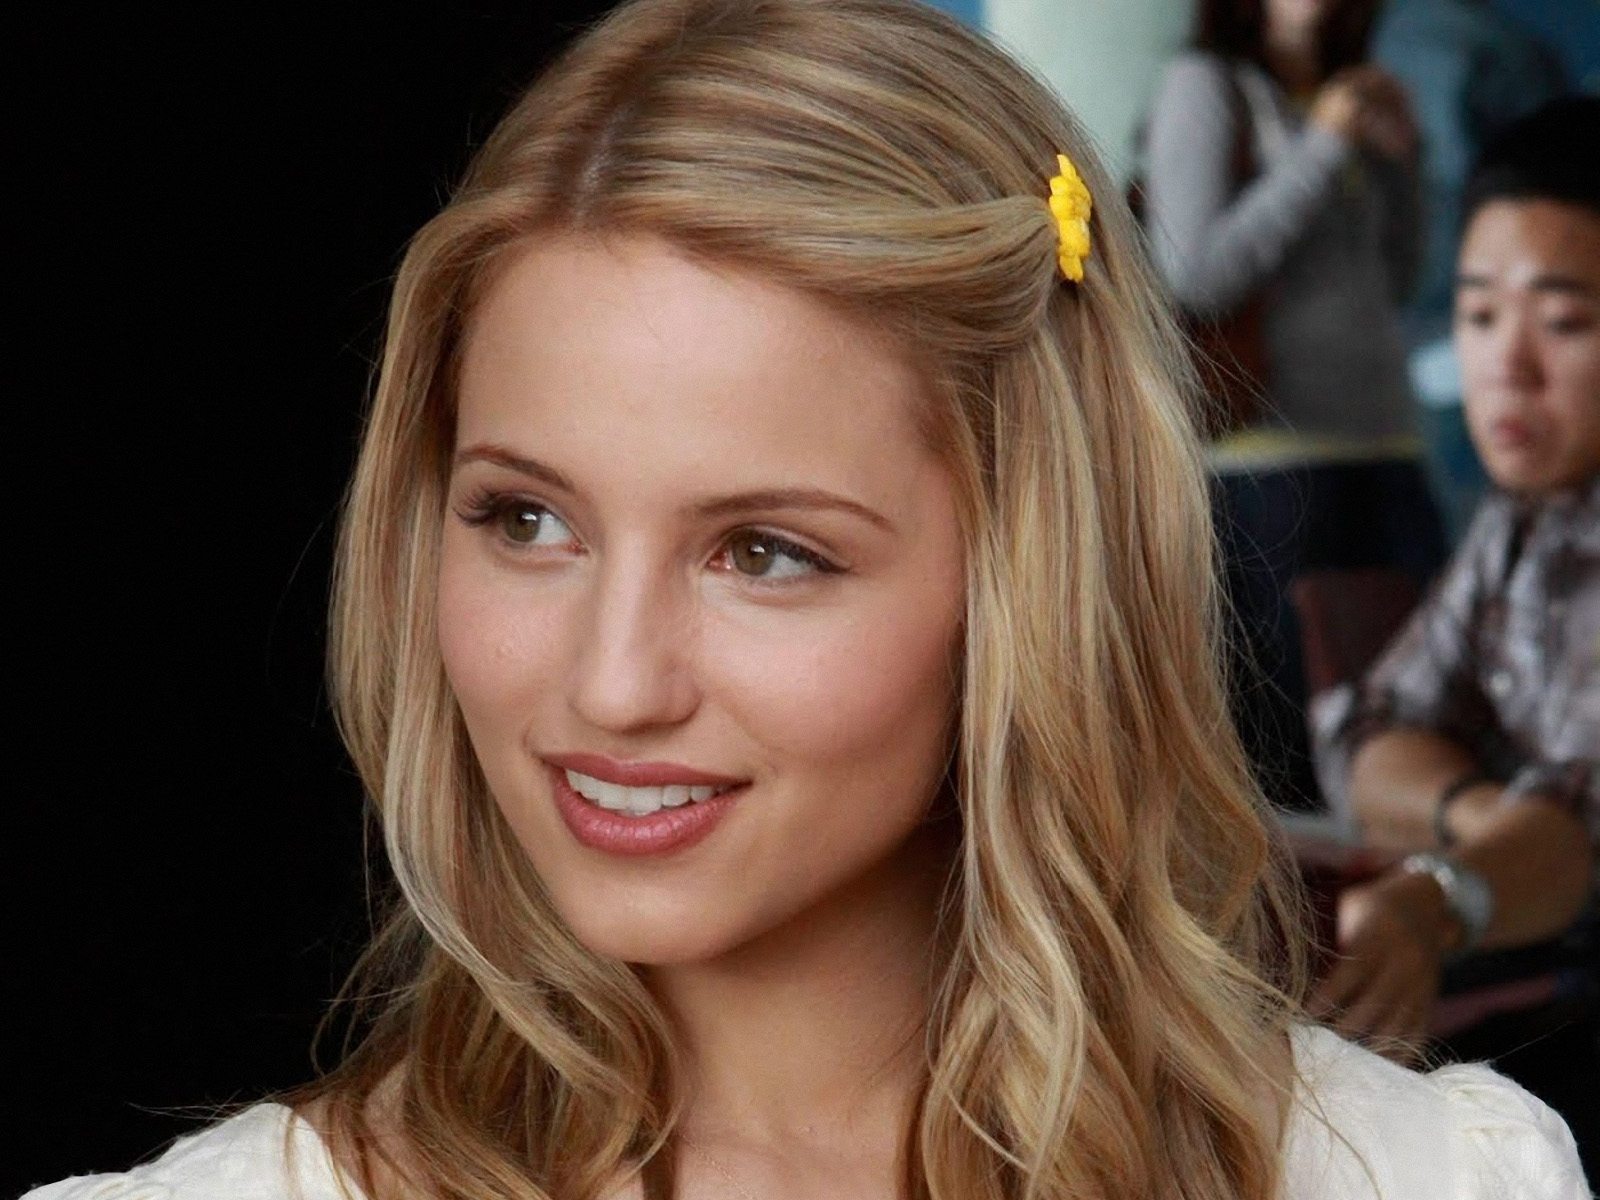 dianna agron wallpapers Wallpapers - Free dianna agron wallpapers ...